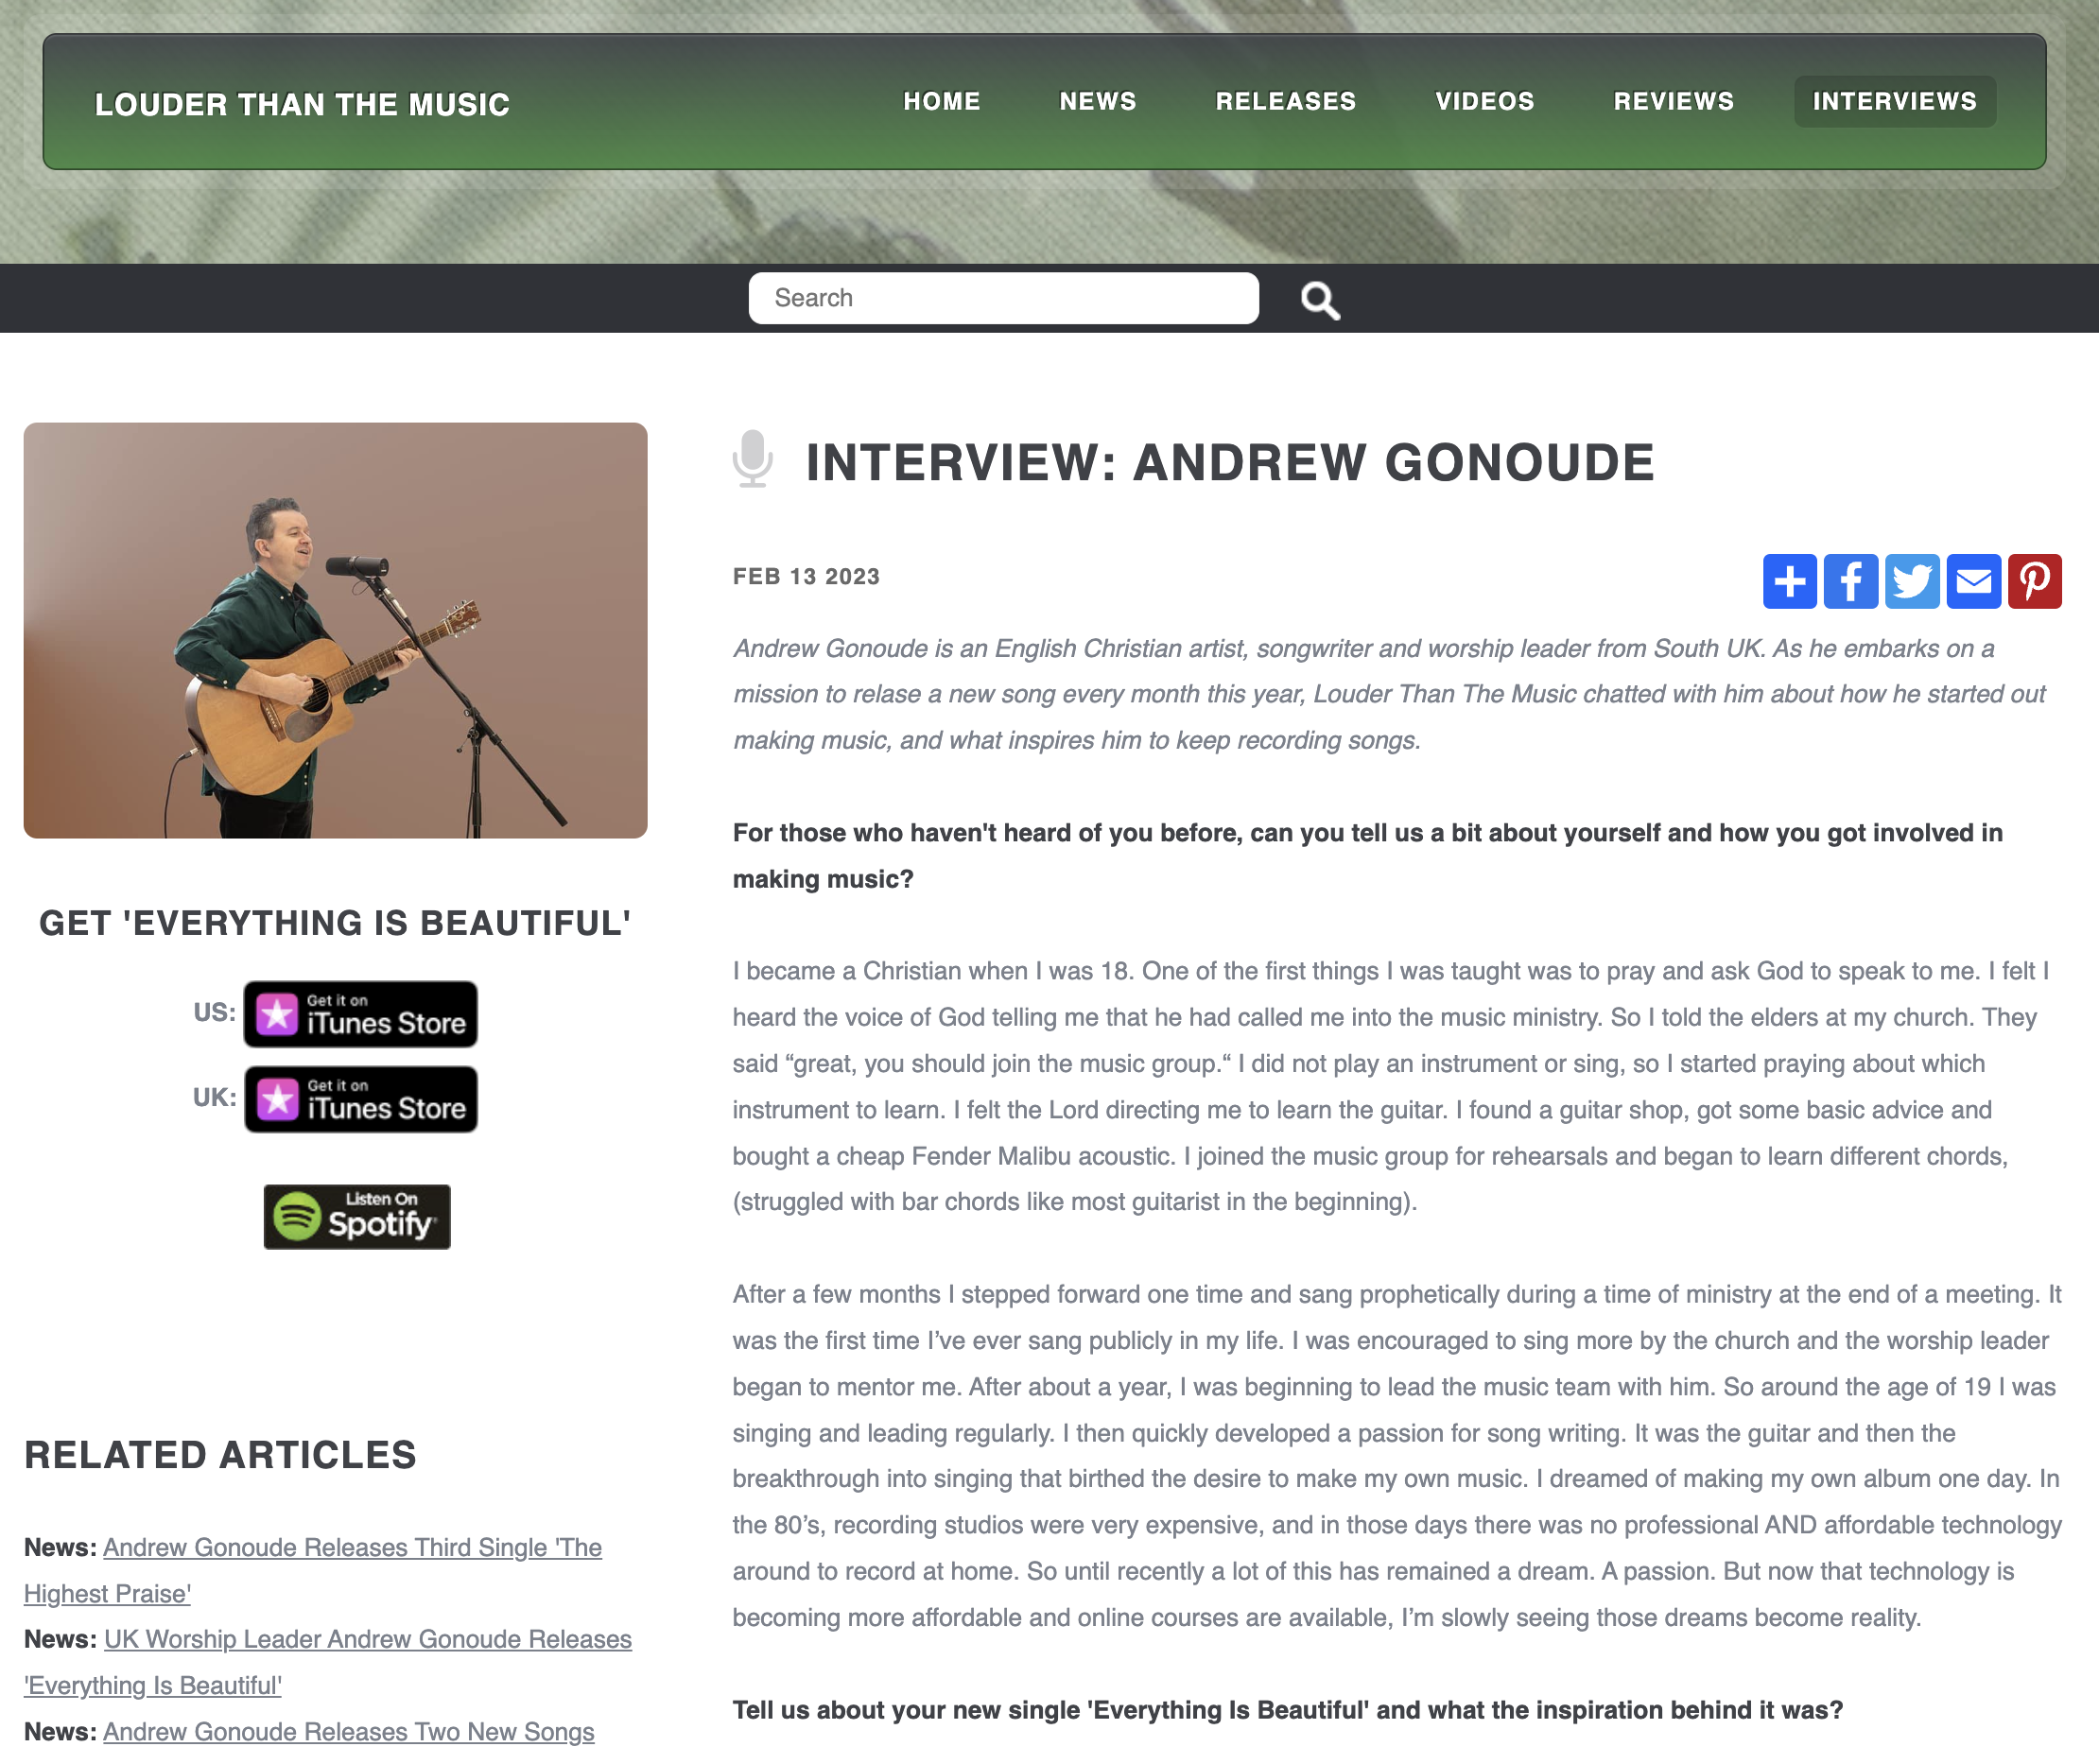 L.T.T.M.is an online Music Review Company based in the UK.  They are very kind, too write articles about my music each month. Recently, they also run an article about some my latest releases, in a Q&A style interview.  